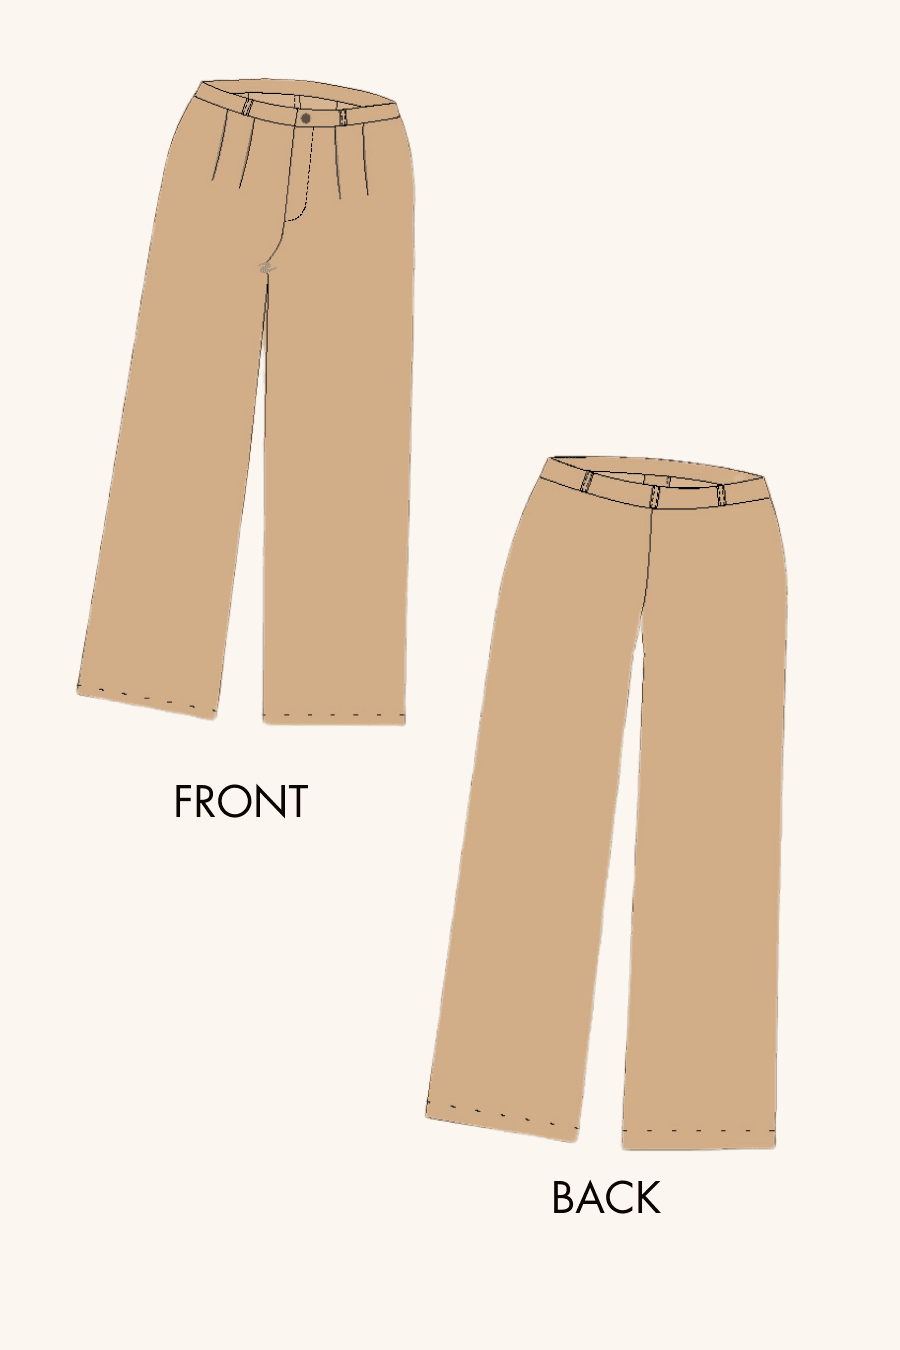 'Amelia' Formal Trousers Sewing Pattern